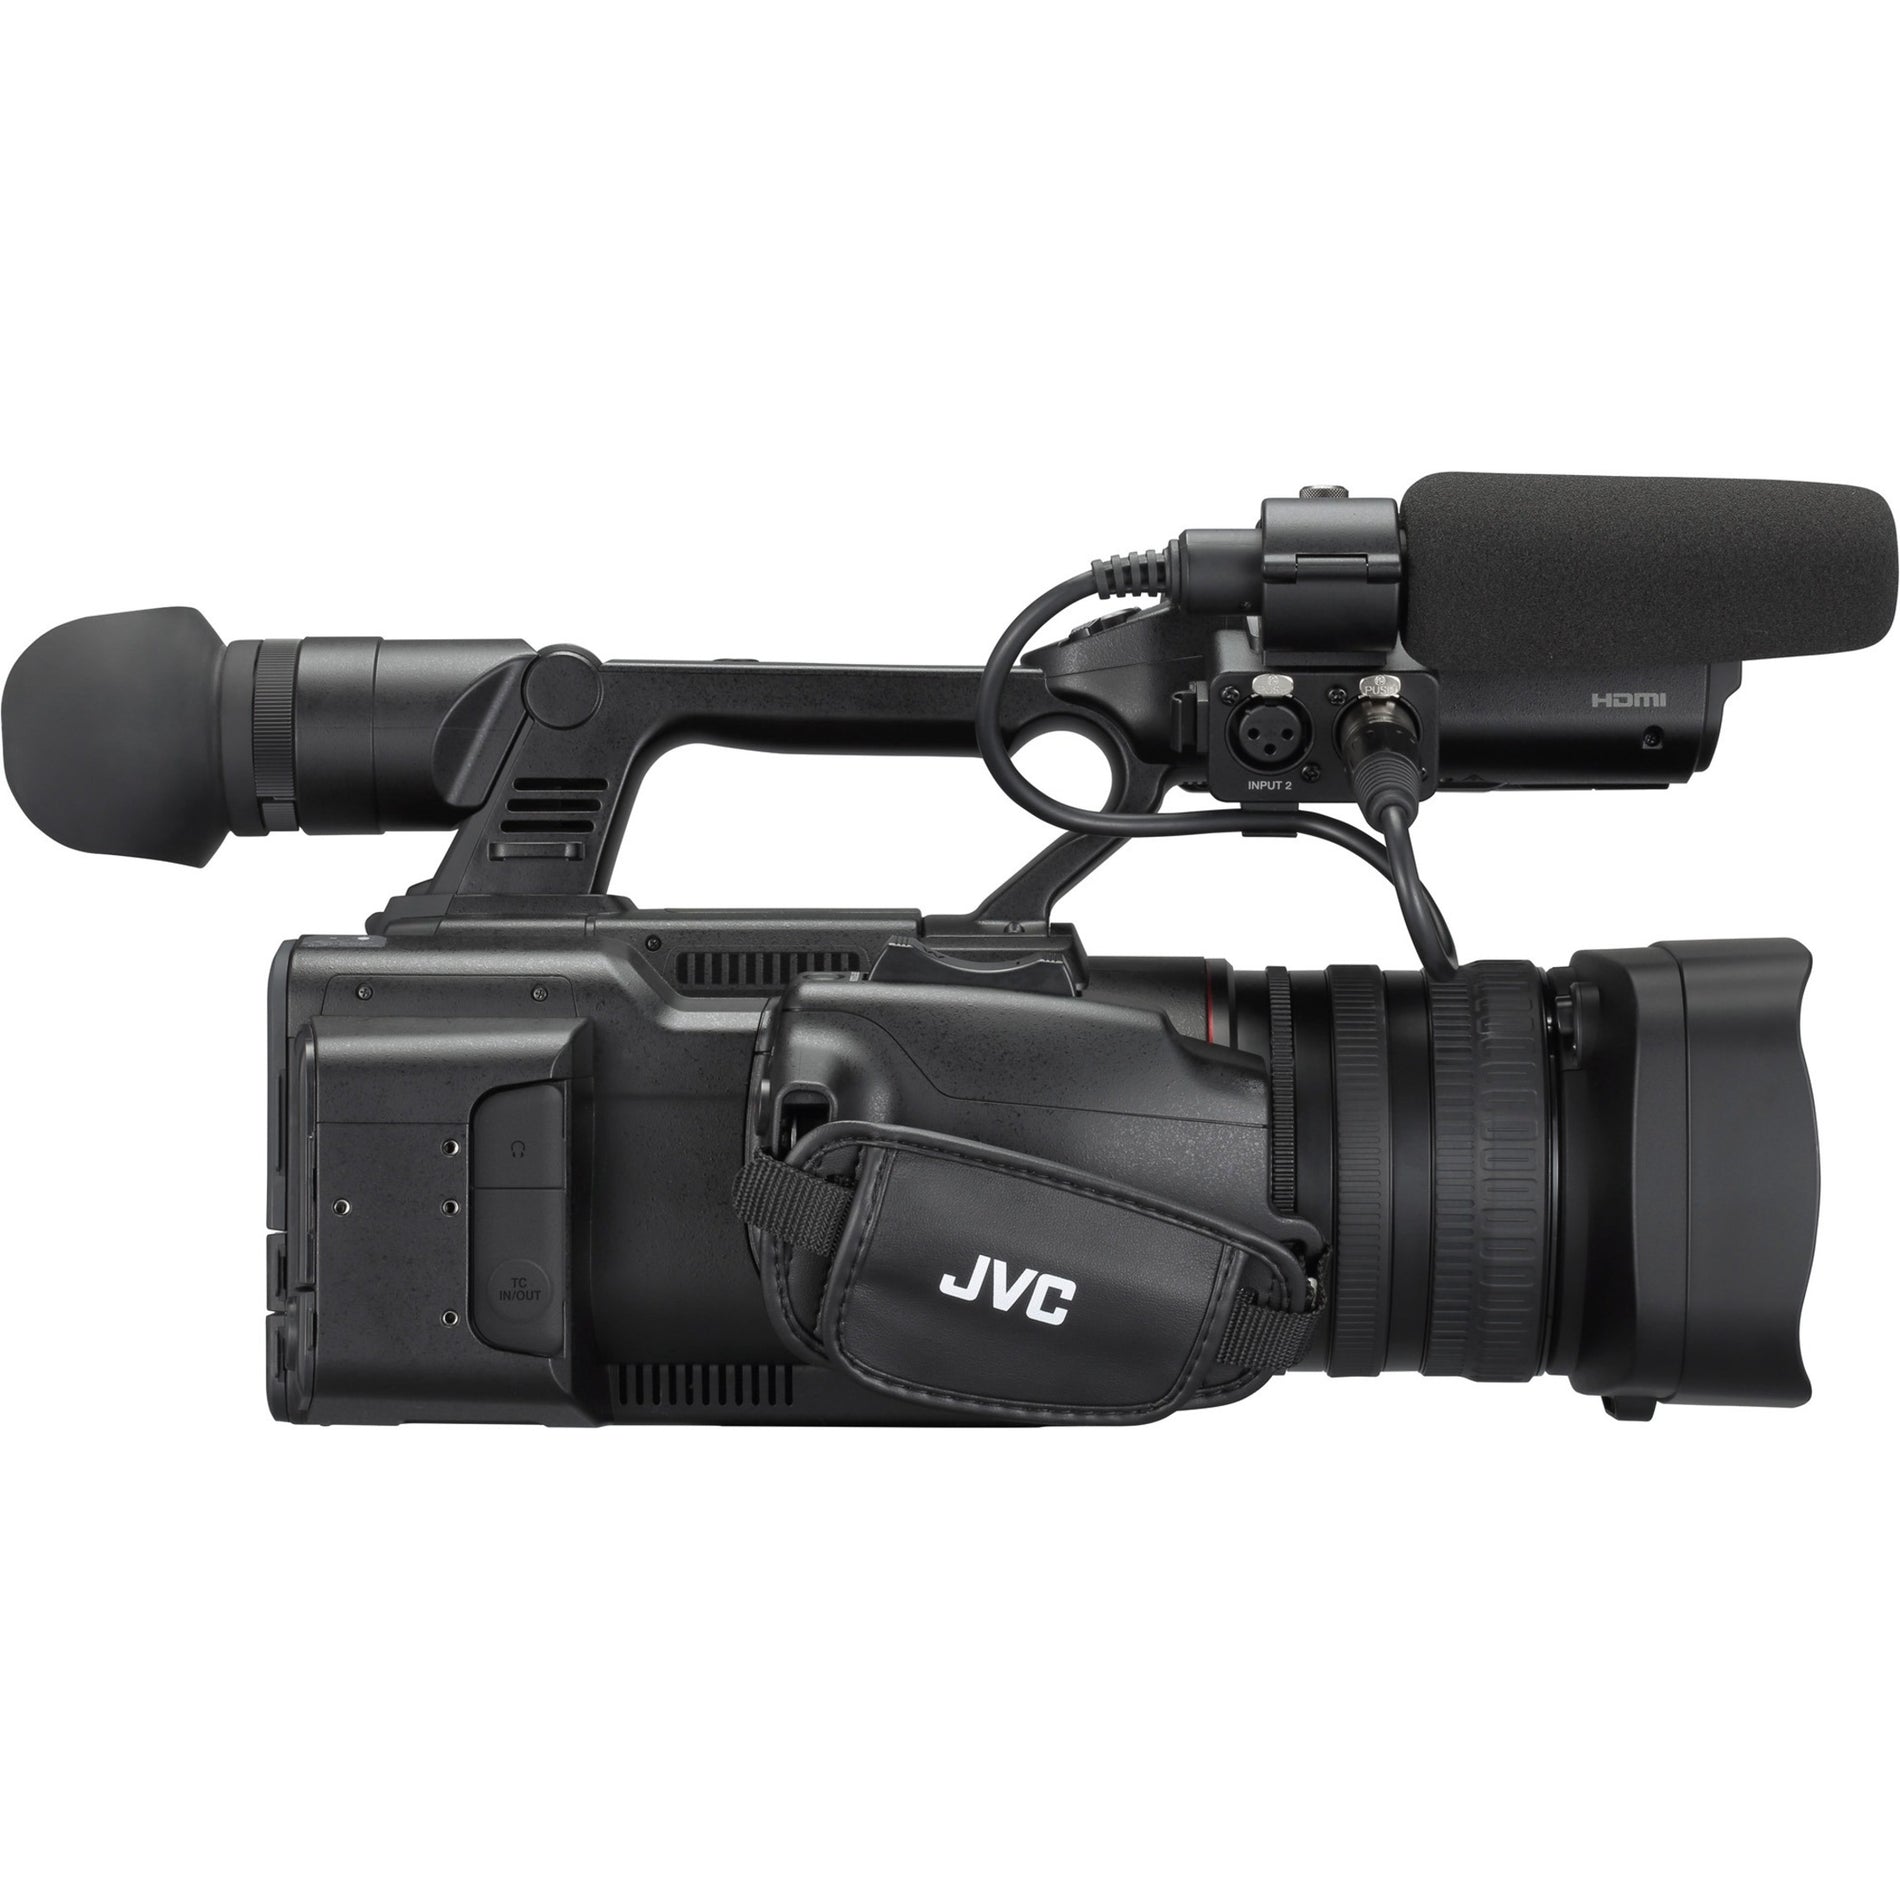 JVC GY-HC500 GY-HC500U 4K Hand-Held Connected Cam 1-inch Camcorder, 20x Optical Zoom, High Dynamic Range (HDR), 4" LCD Screen